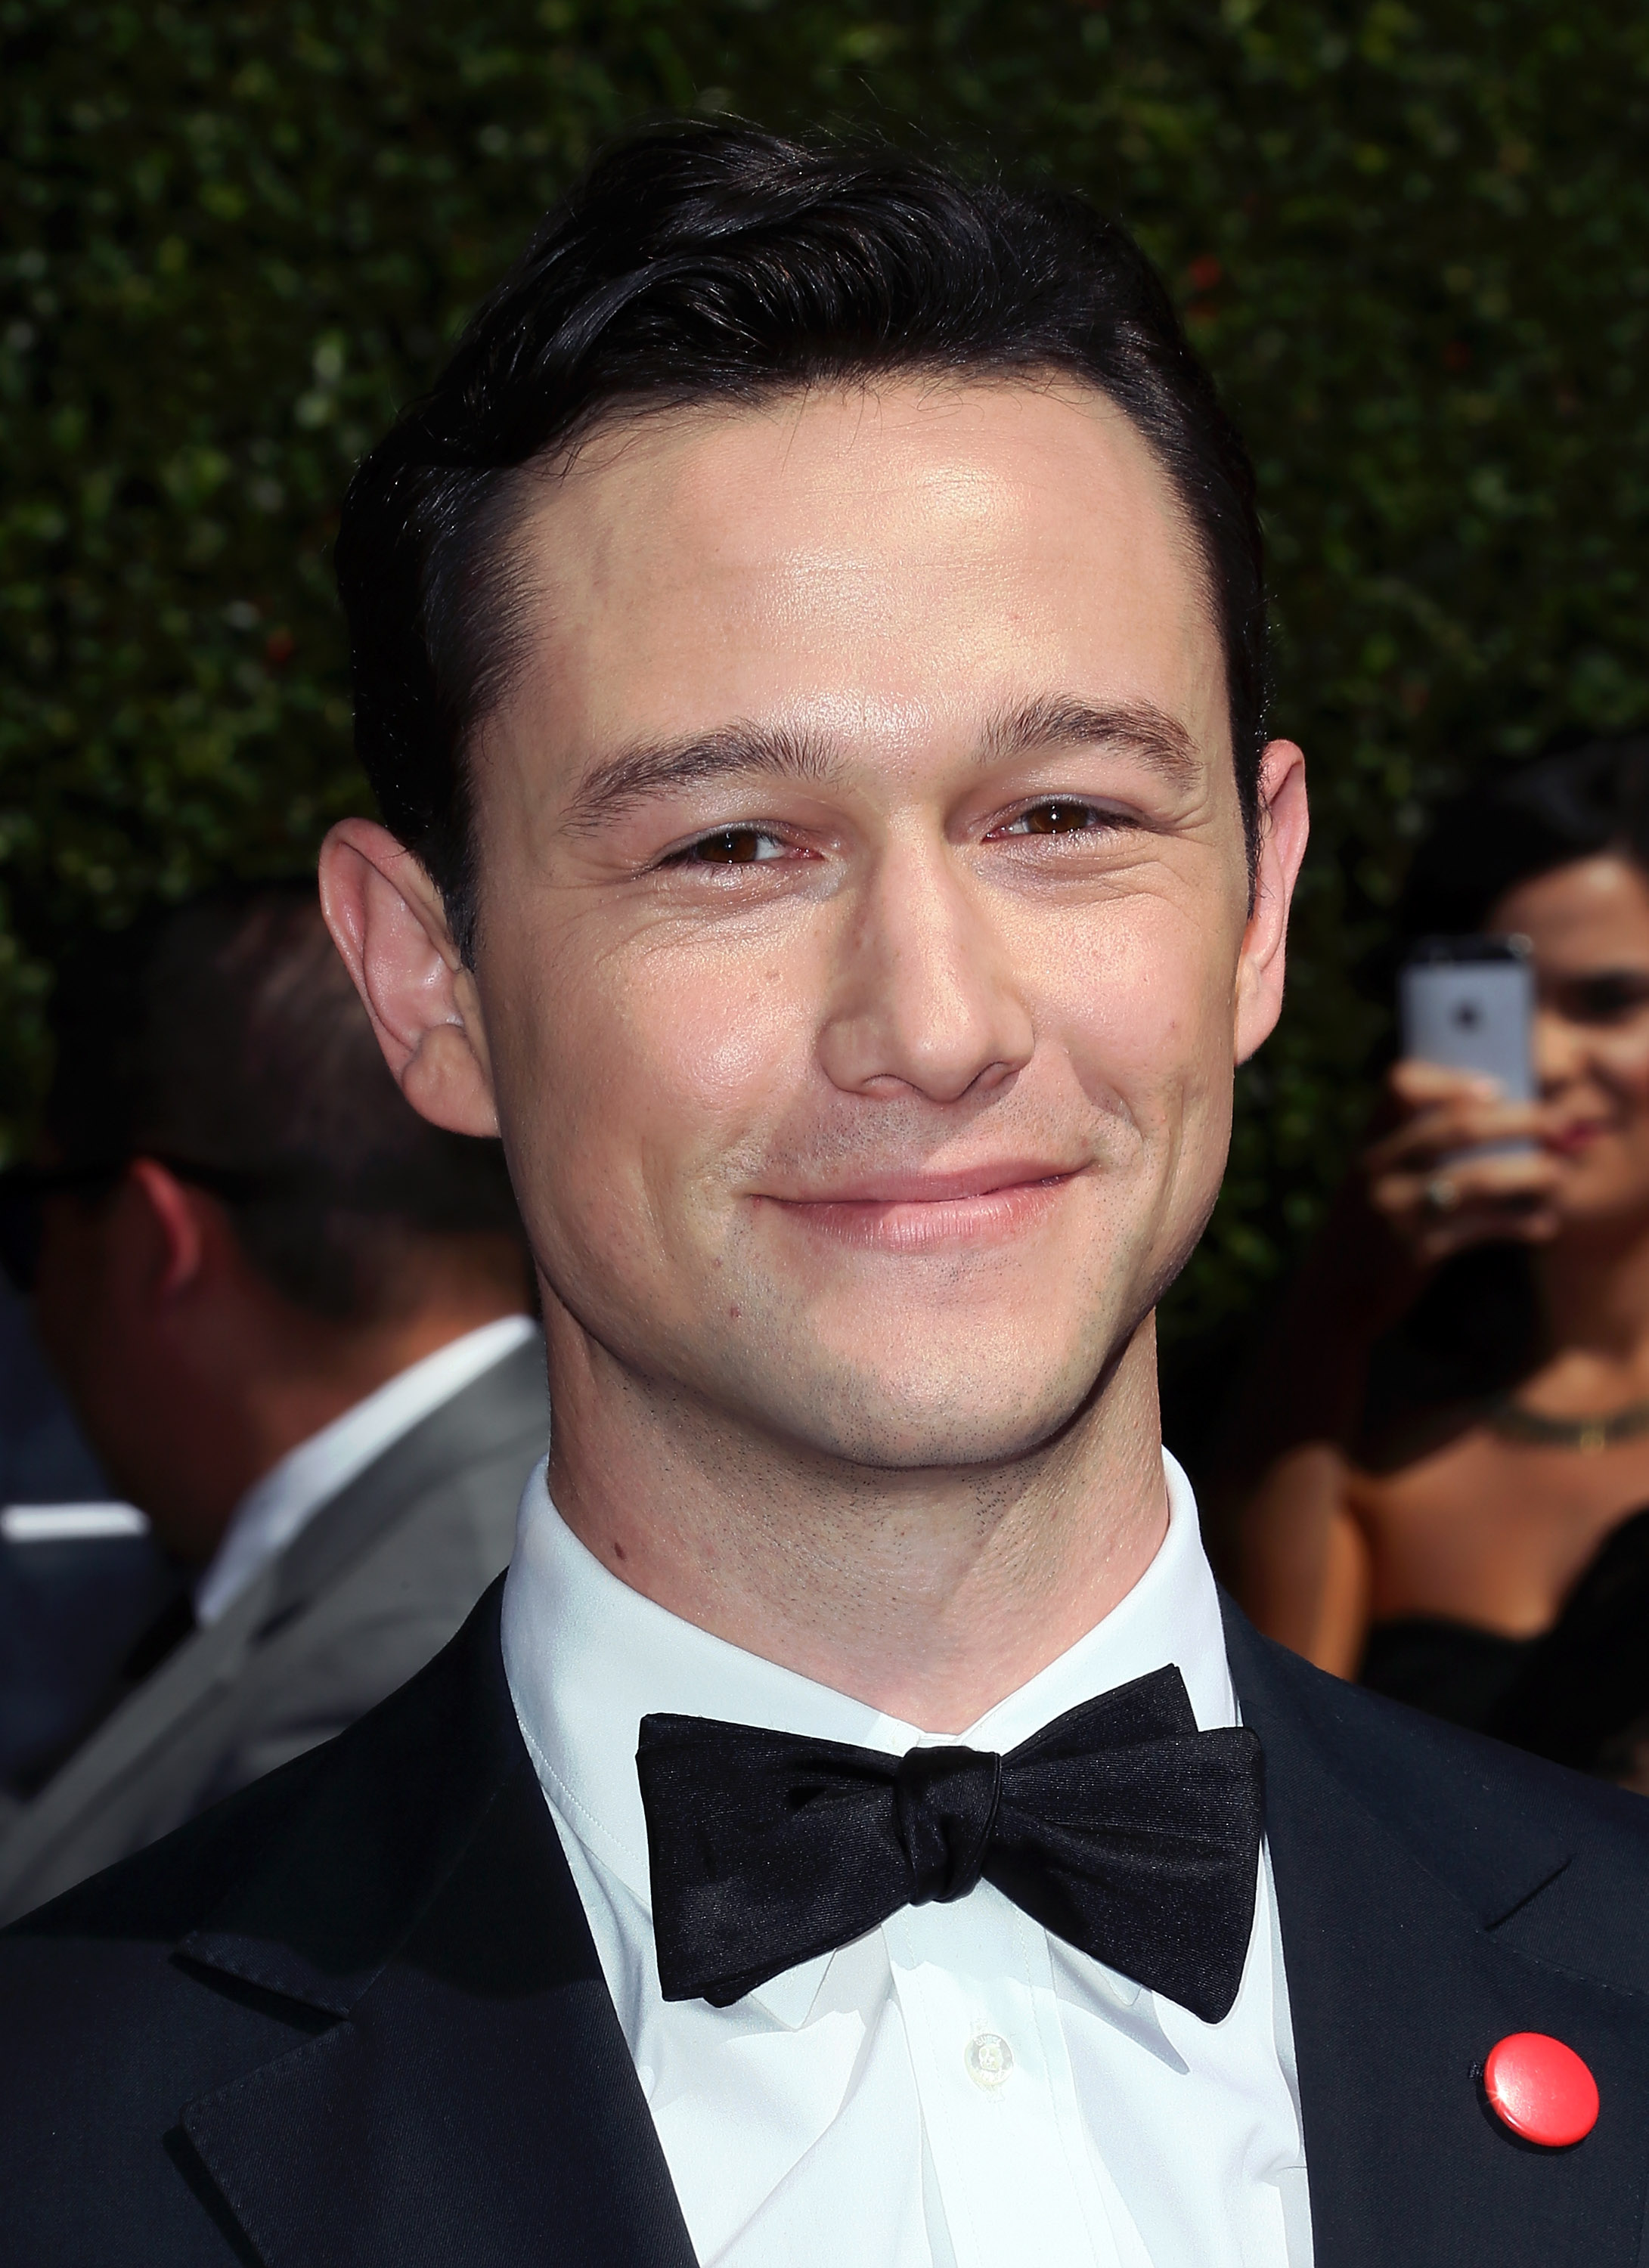 Joseph Gordon-Levitt attends the 2014 Creative Arts Emmy Awards at the Nokia Theatre L.A. Live on Aug. 16, 2014 in Los Angeles. (David Livingston--Getty Images)